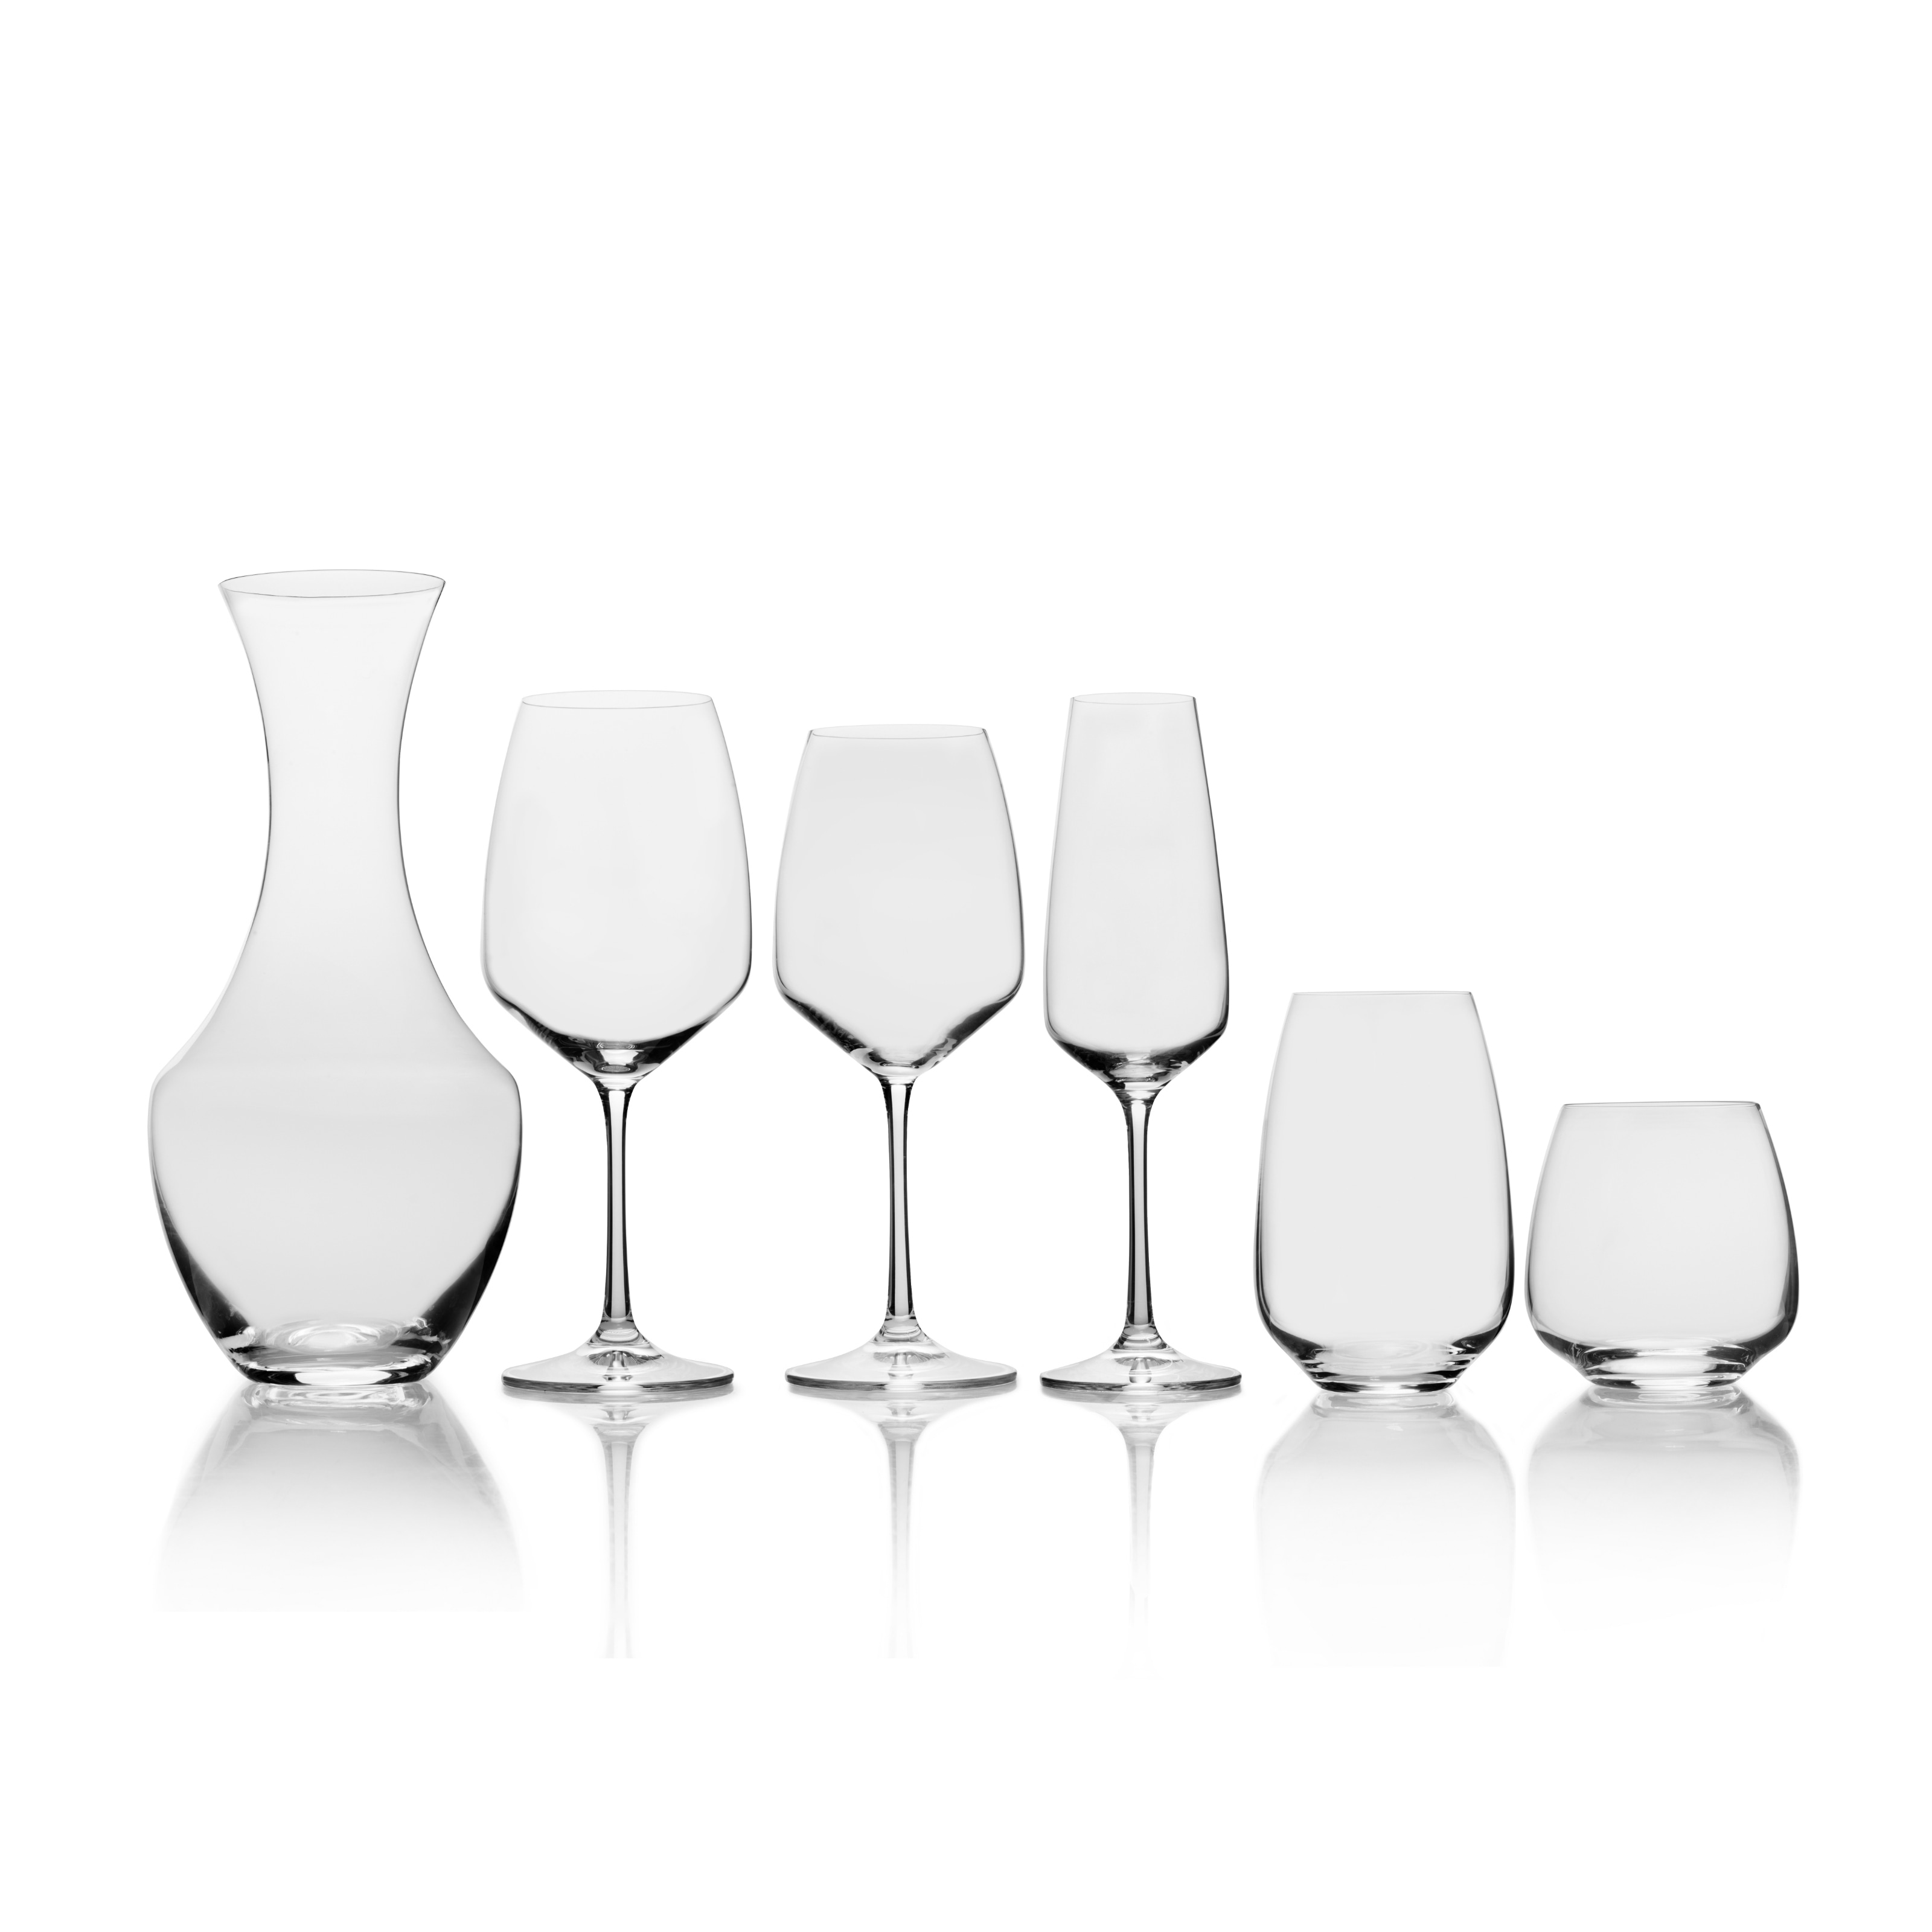 Bezrat Wine Glasses  6-Piece 18 oz Stemware Set Made From Crystal-Cle